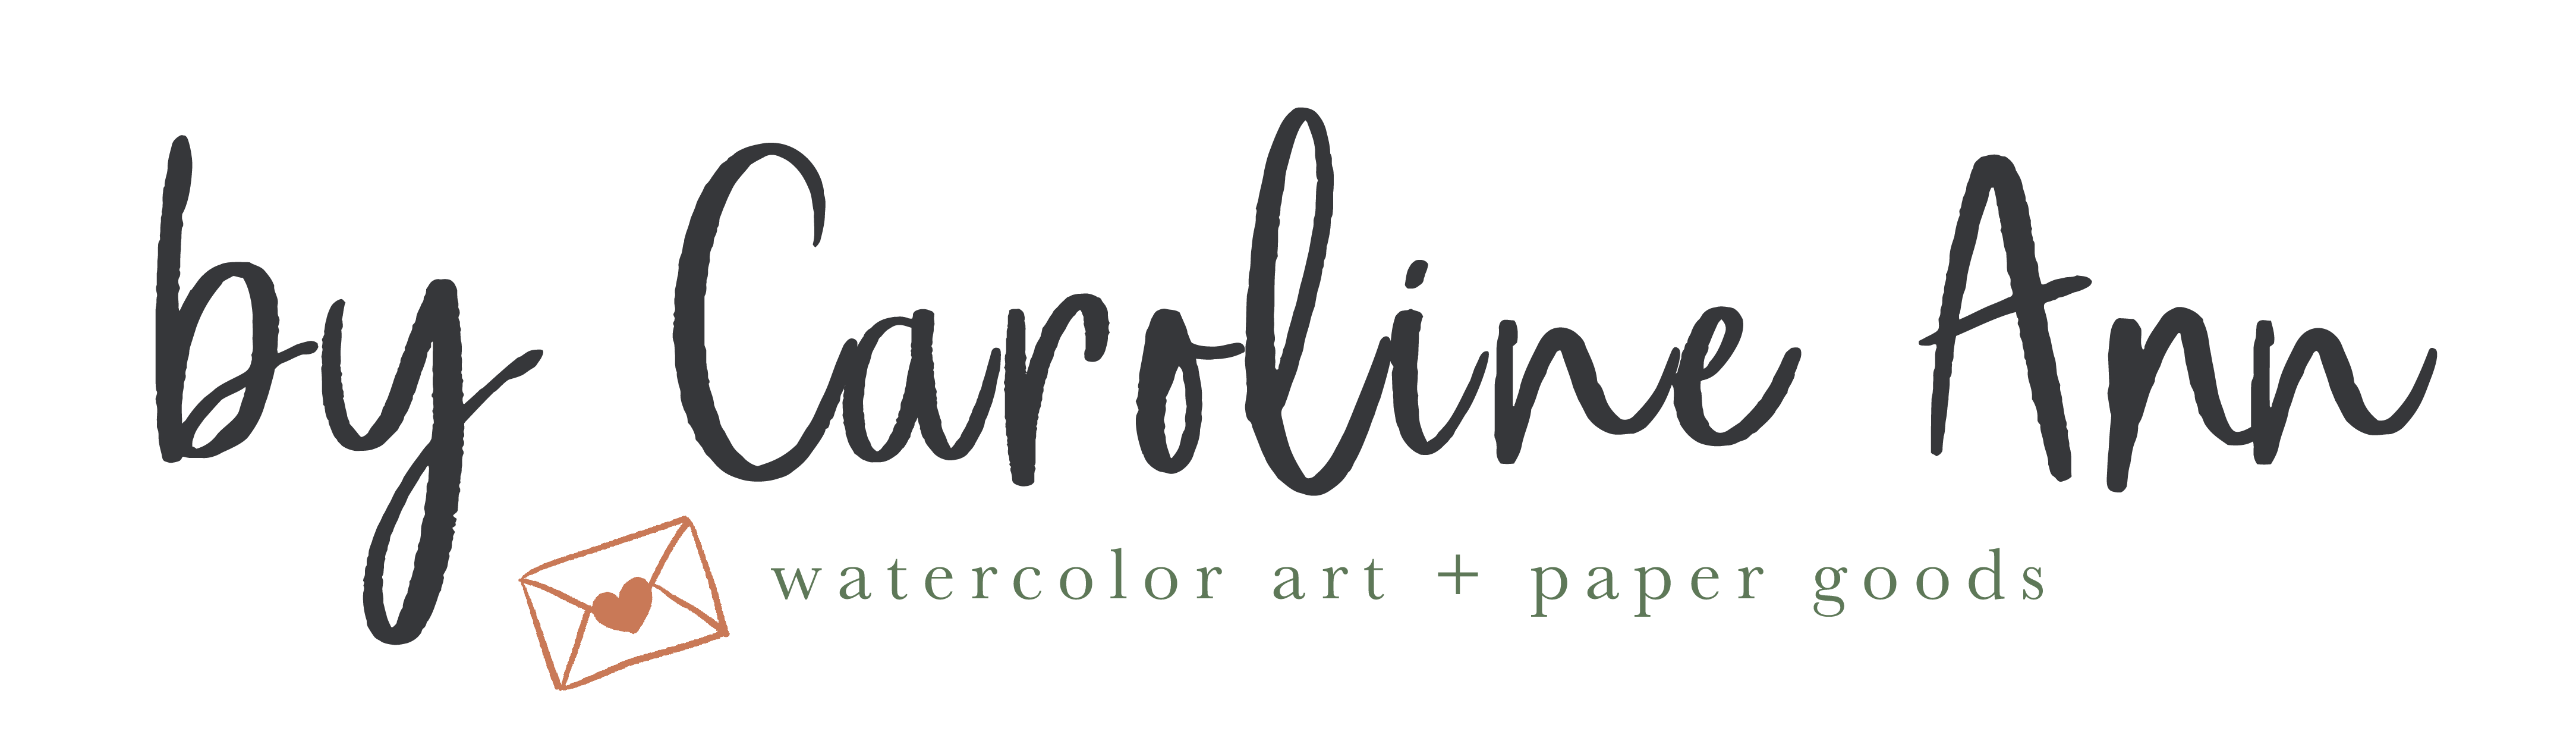 By Caroline Ann logo hand lettering brush font with pink envelope that says watercolor art + paper goods. Dusty grey and navy blue script with pink envelope with heart. Click for more information on custom wedding invitations Dallas Texas